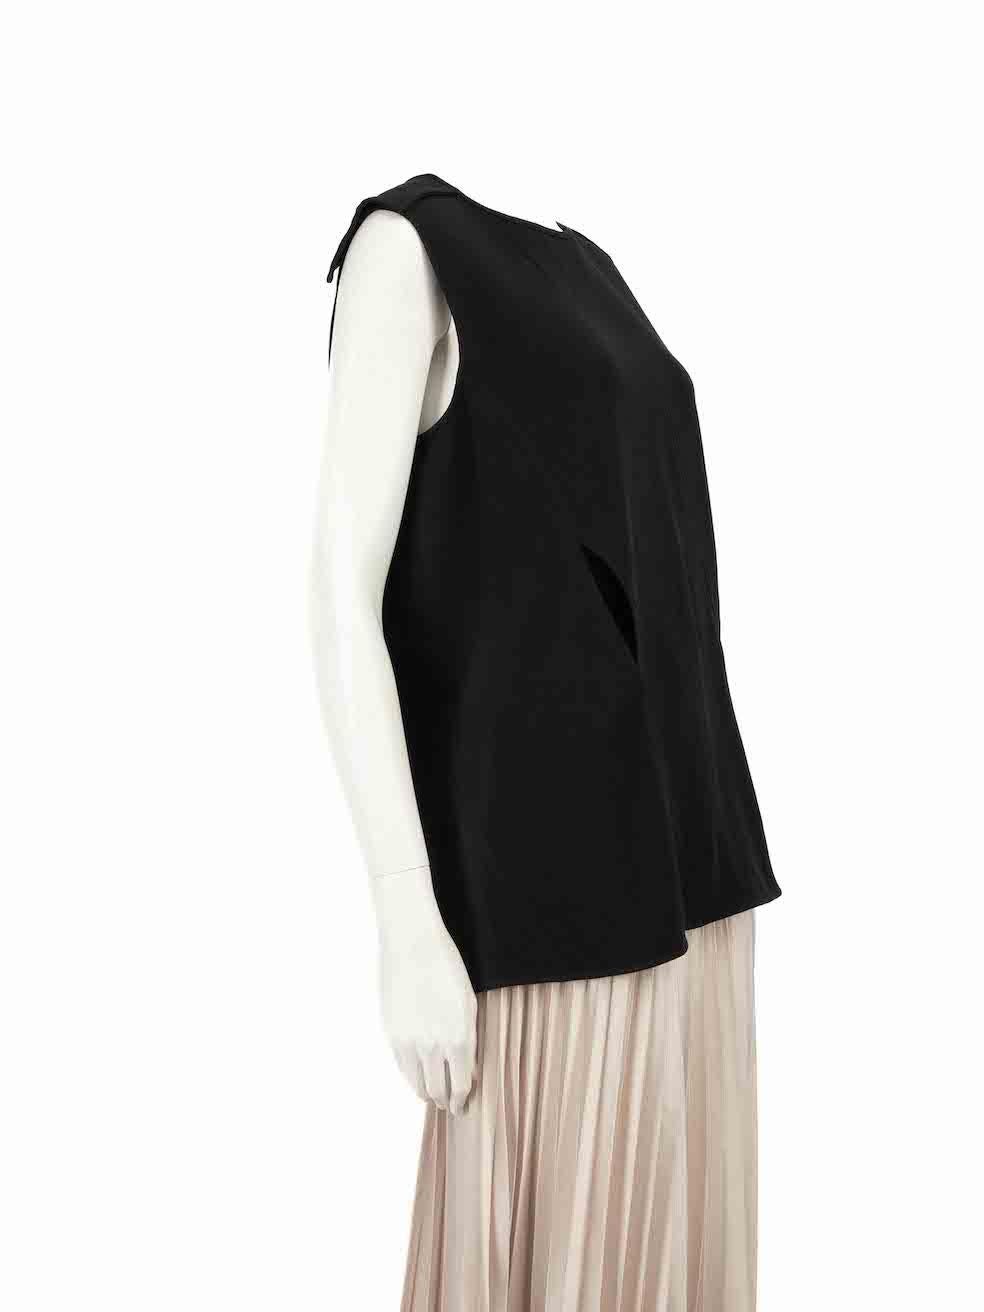 CONDITION is Very good. Hardly any visible wear to top is evident on this used Tom Ford designer resale item.
 
 
 
 Details
 
 
 Black
 
 Viscose
 
 Sleeveless top
 
 Round neckline
 
 Slash detail on waist
 
 Open back with snap button closure
 
